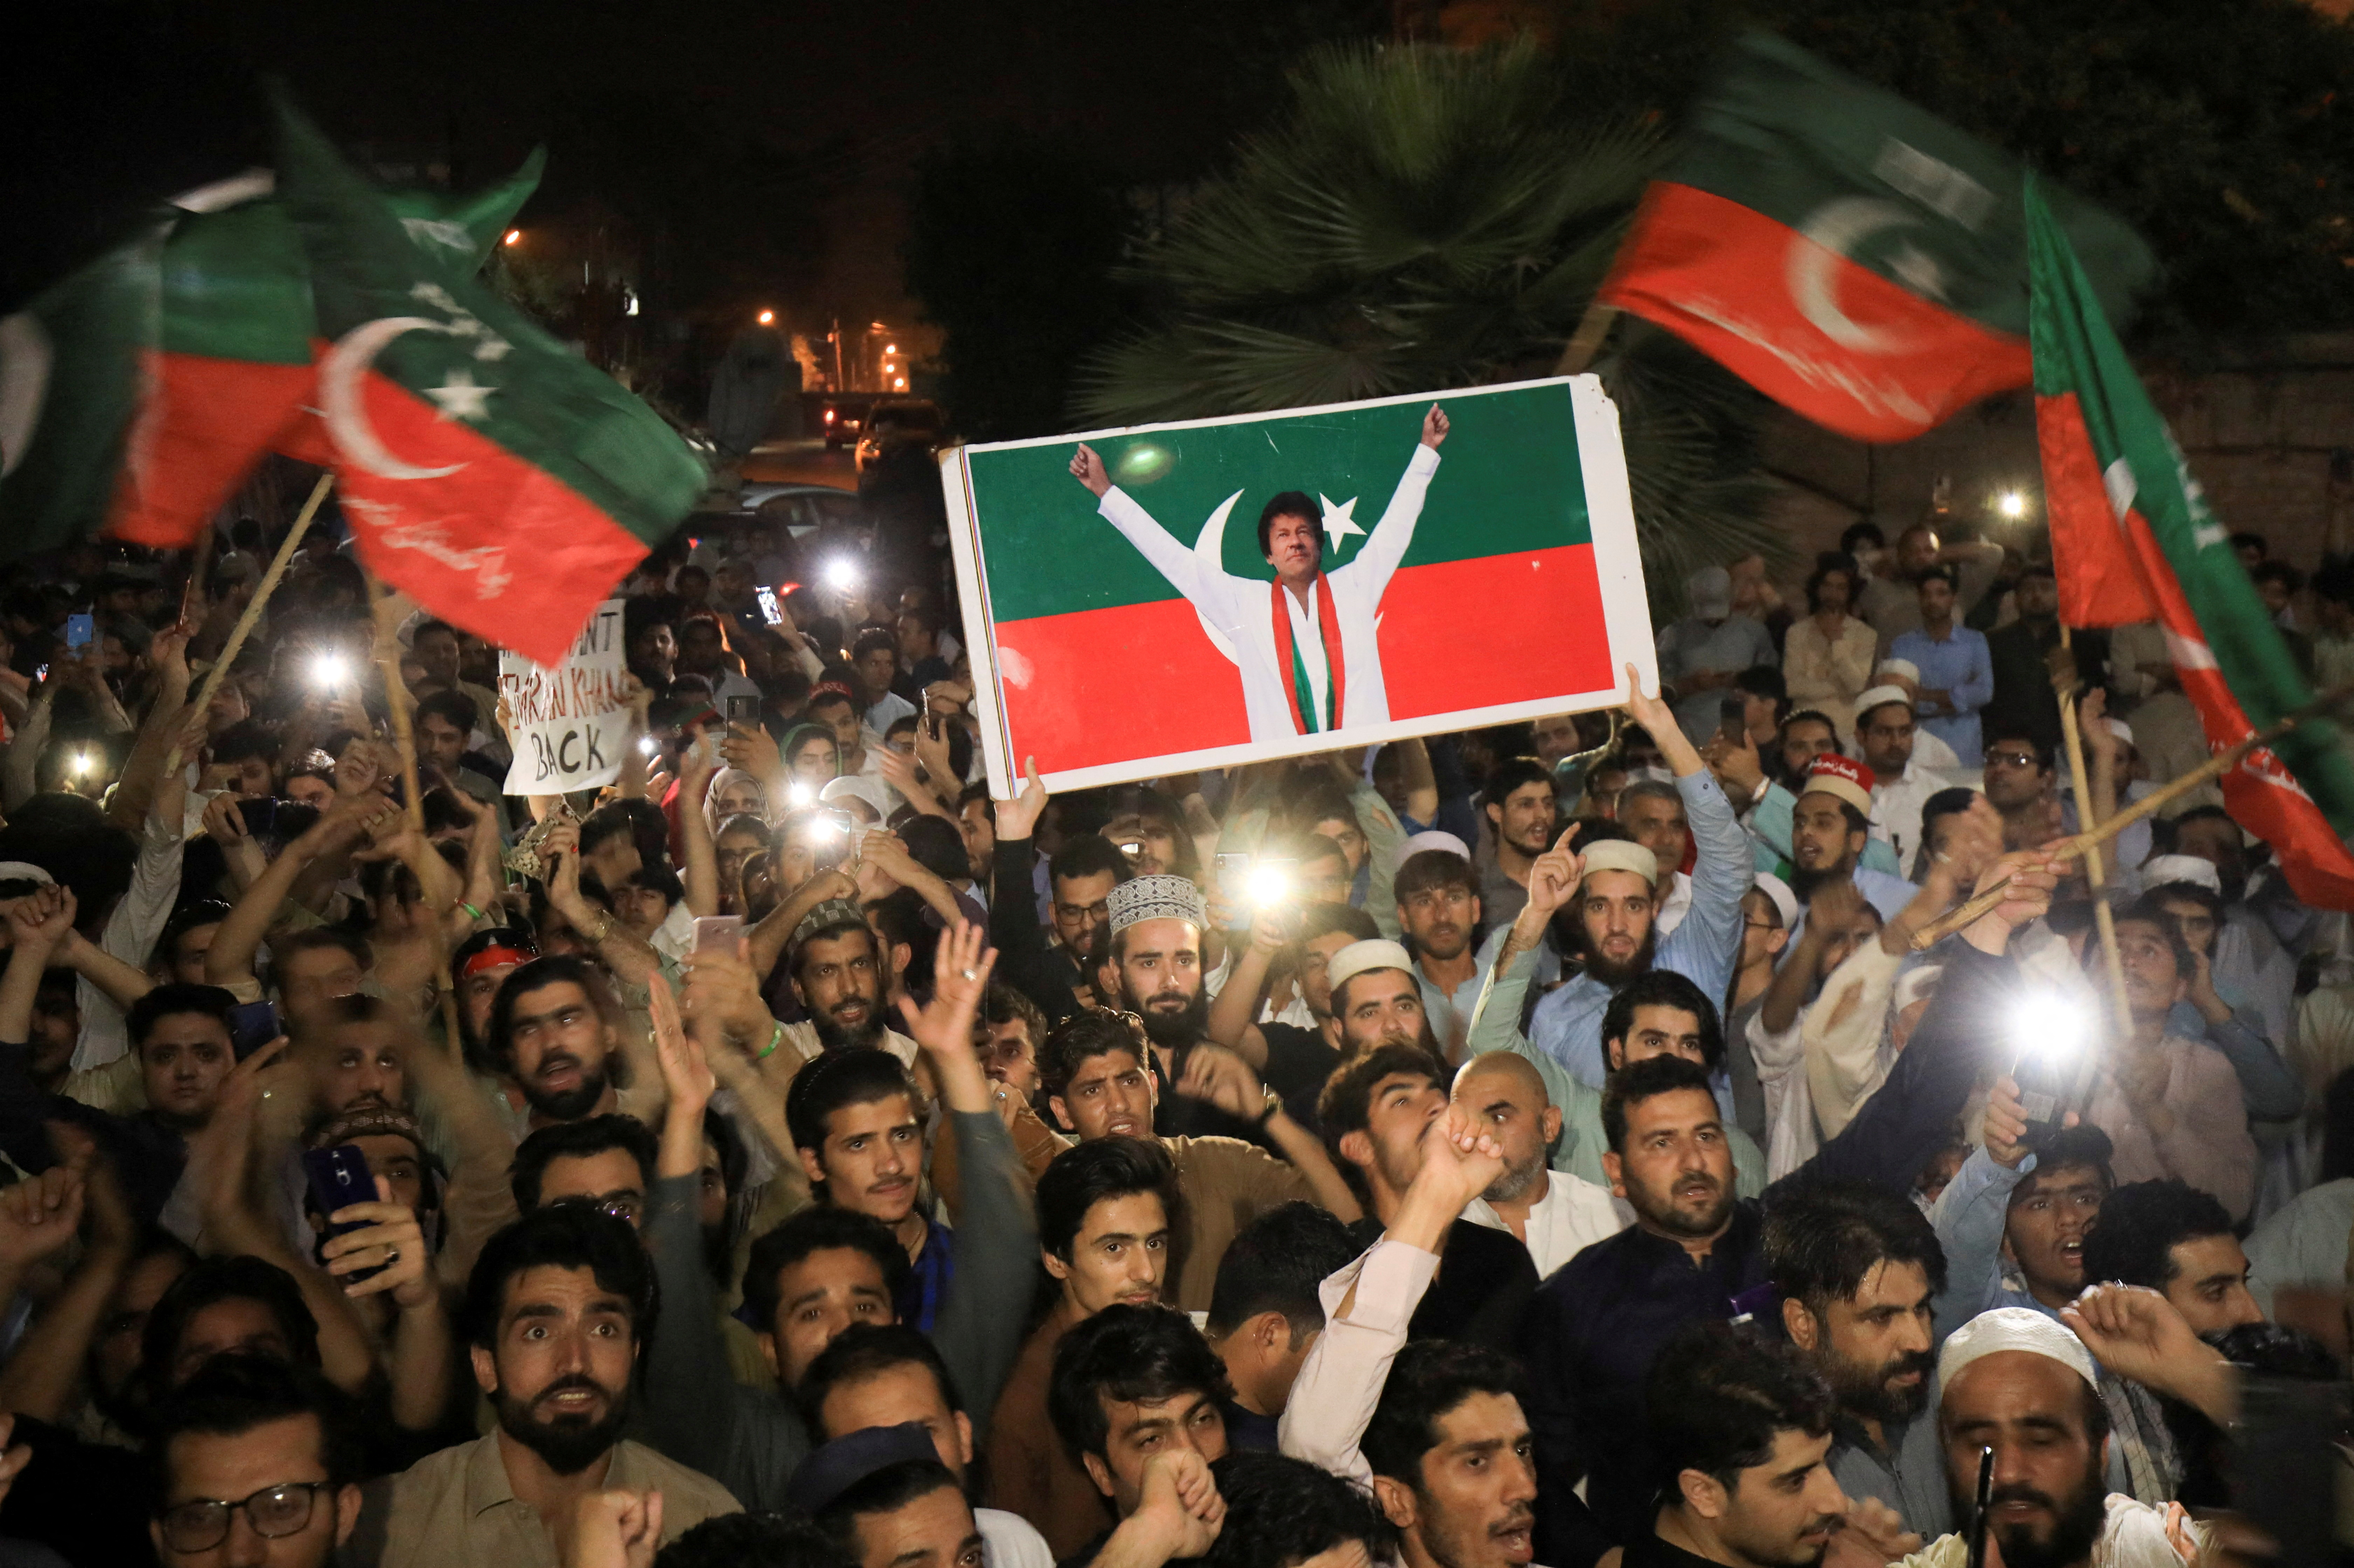 People rally in support of former Pakistani Prime Minister Imran Khan, in Peshawar